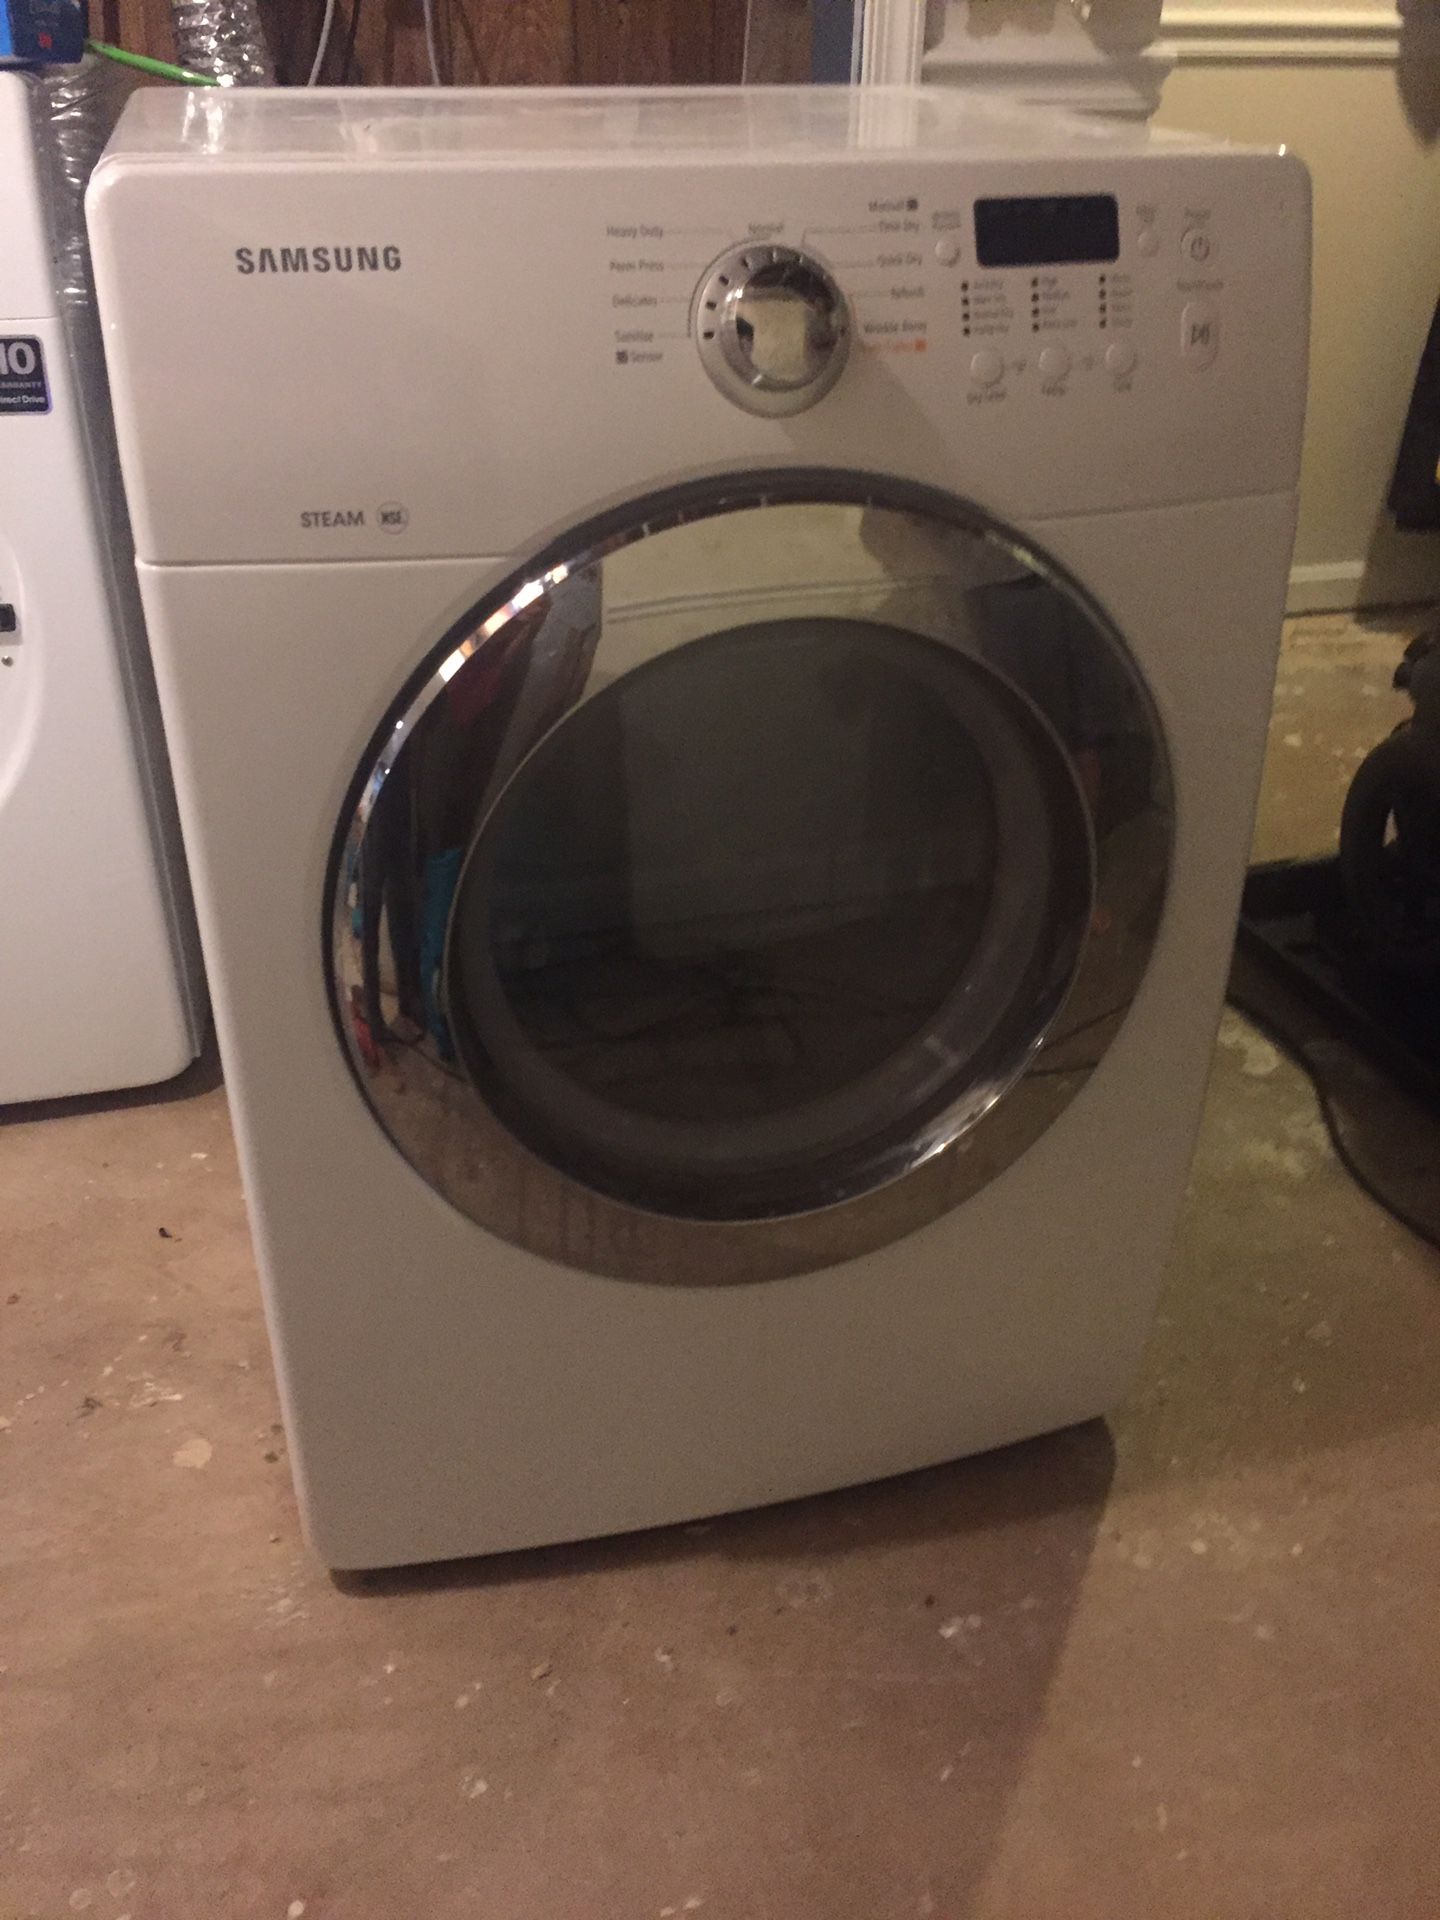 Samsung electric dryer, working but not heating